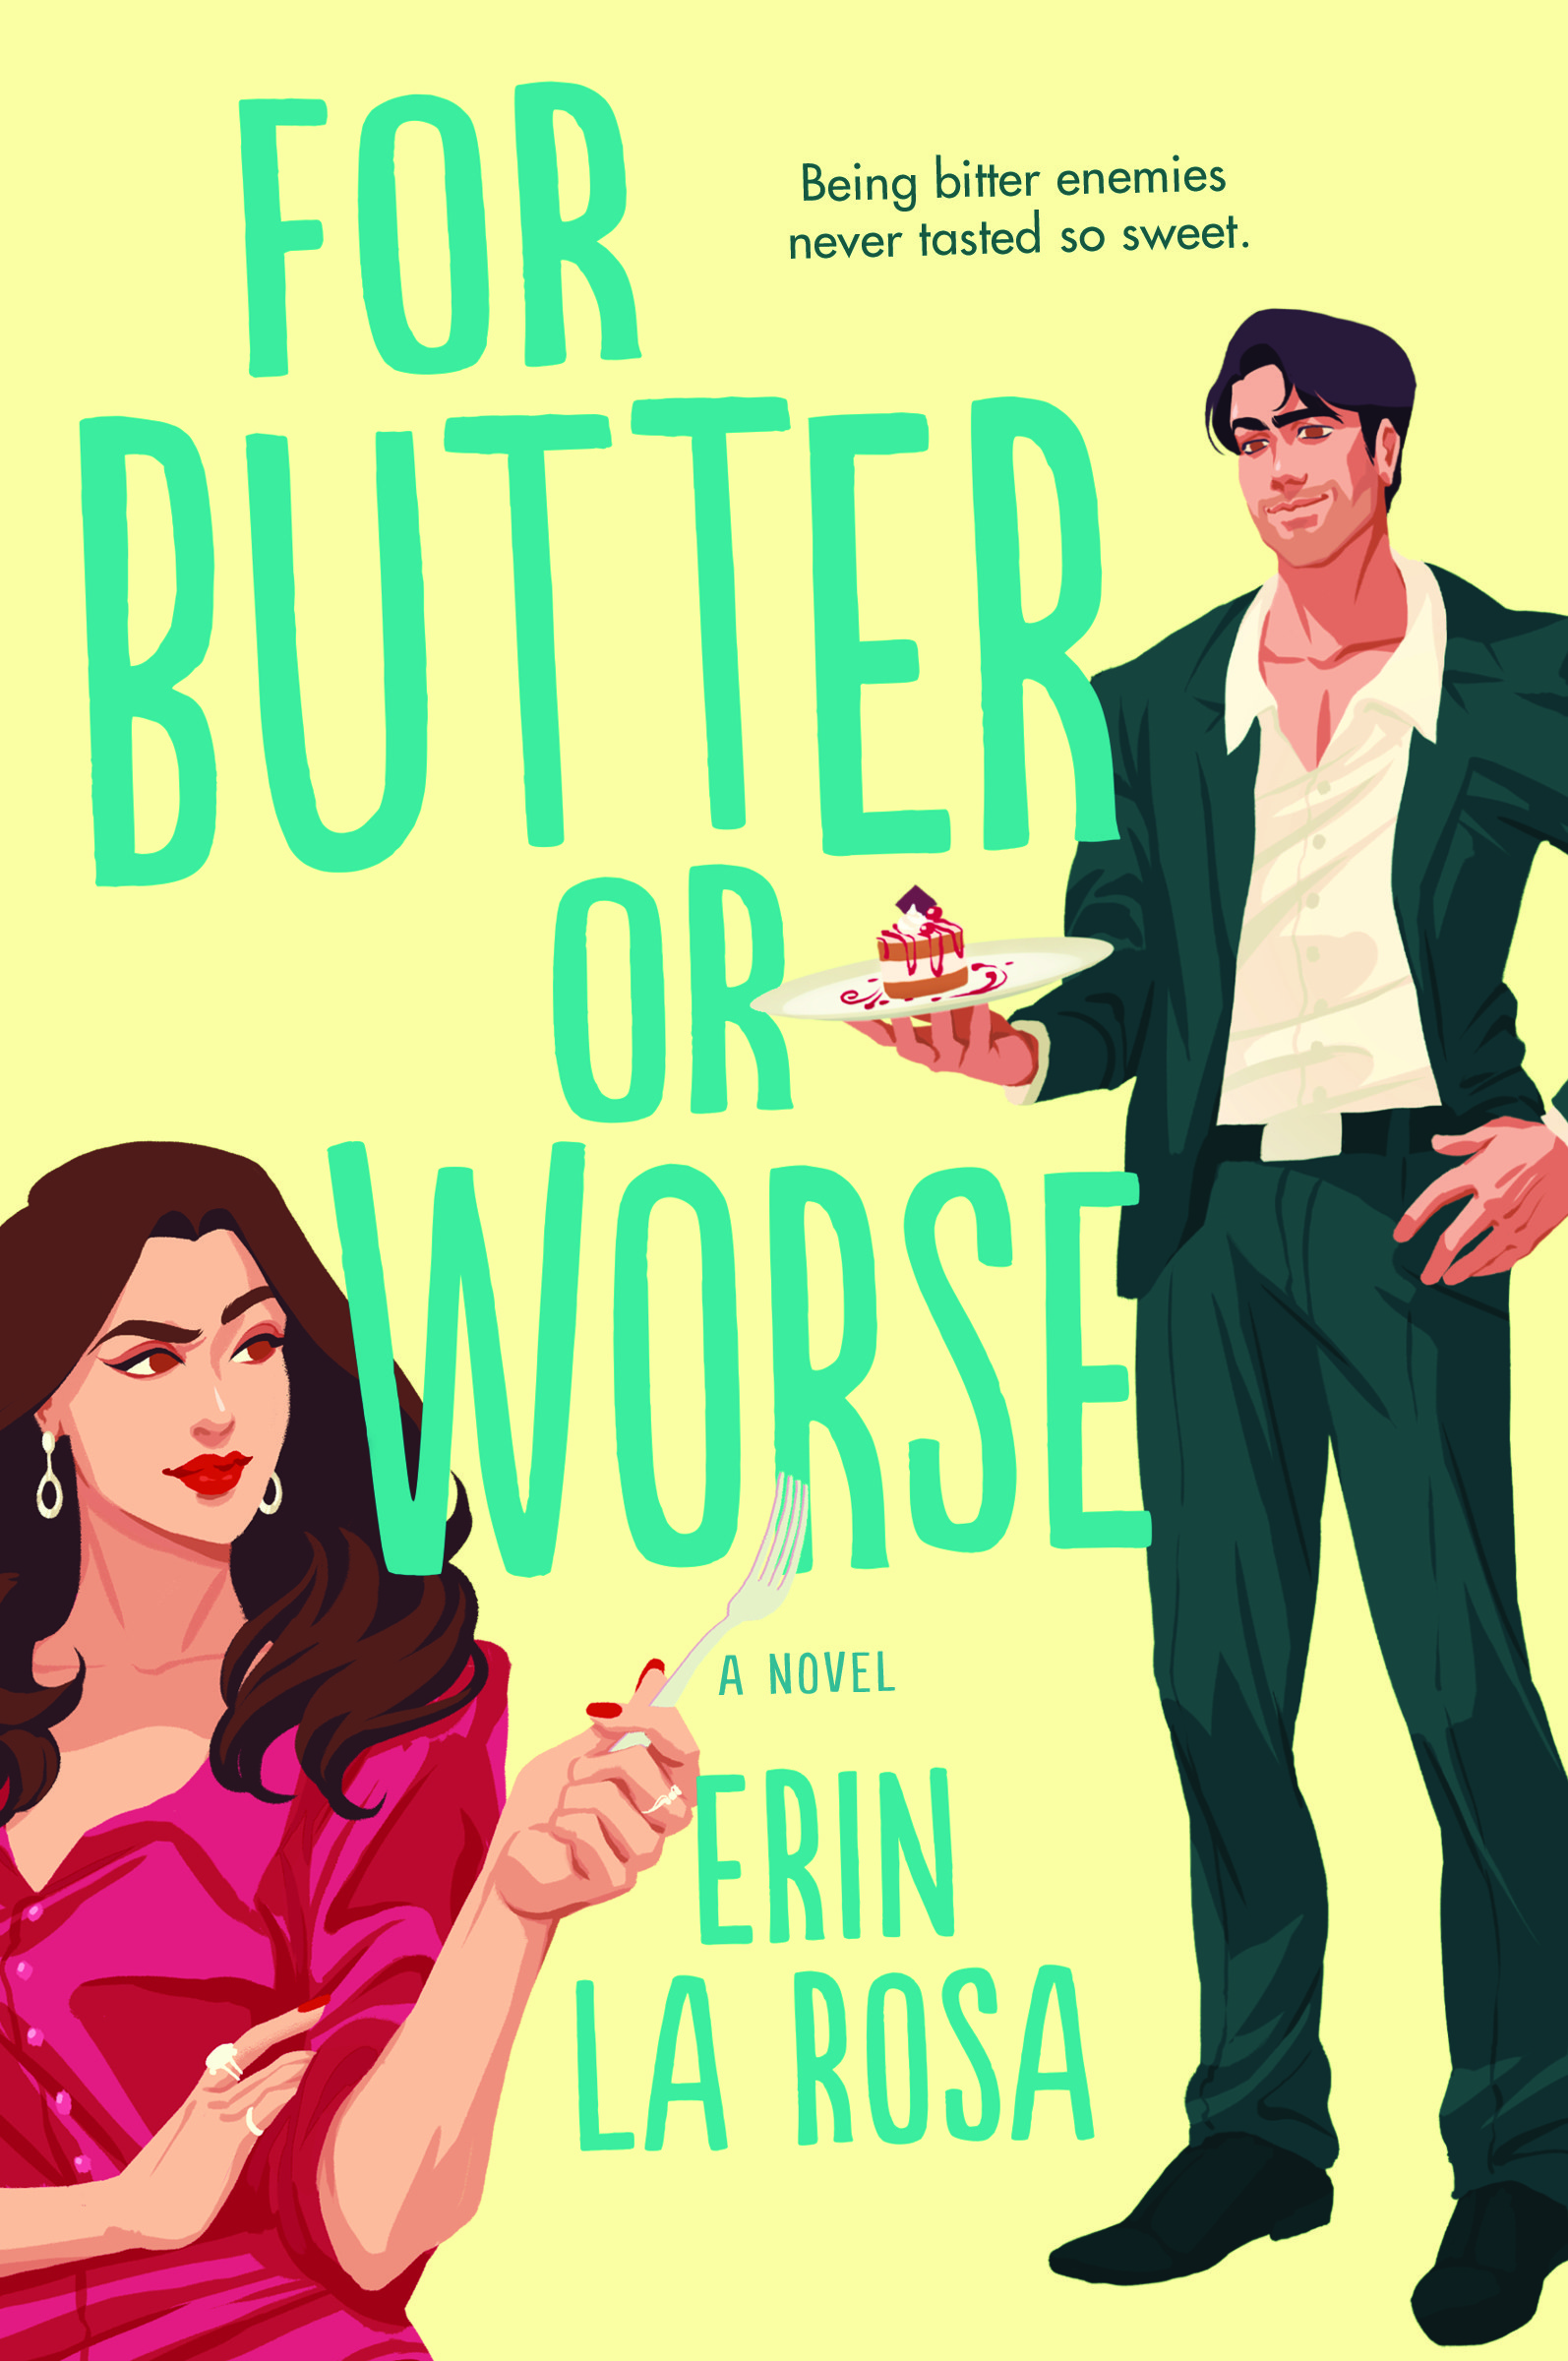 For Butter or Worse cover. Book by Erin La Rosa